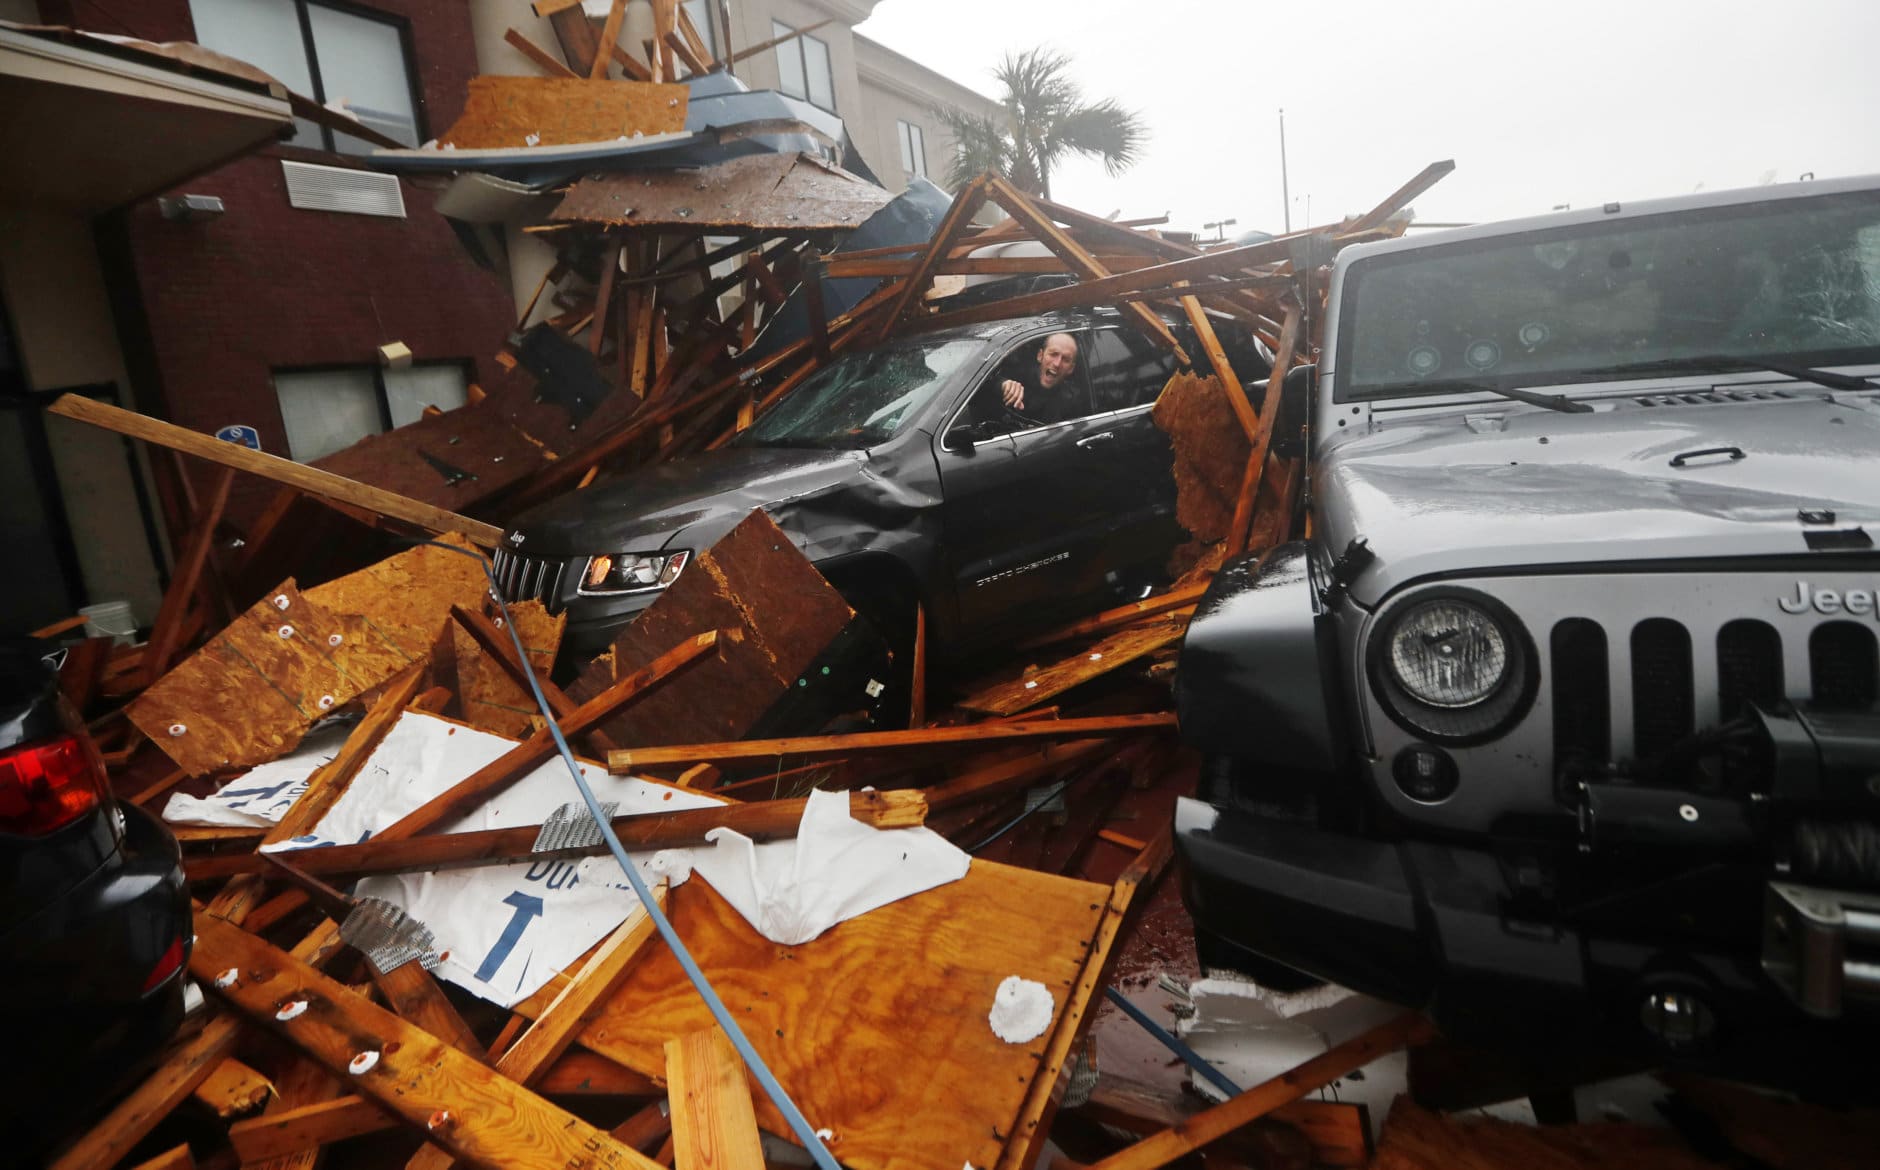 A storm chaser climbs into his vehicle to retrieve equipment after a hotel canopy collapsed, as the eye of Hurricane Michael passes over Panama City Beach, Fla., on Oct. 10, 2018. (AP Photo/Gerald Herbert)